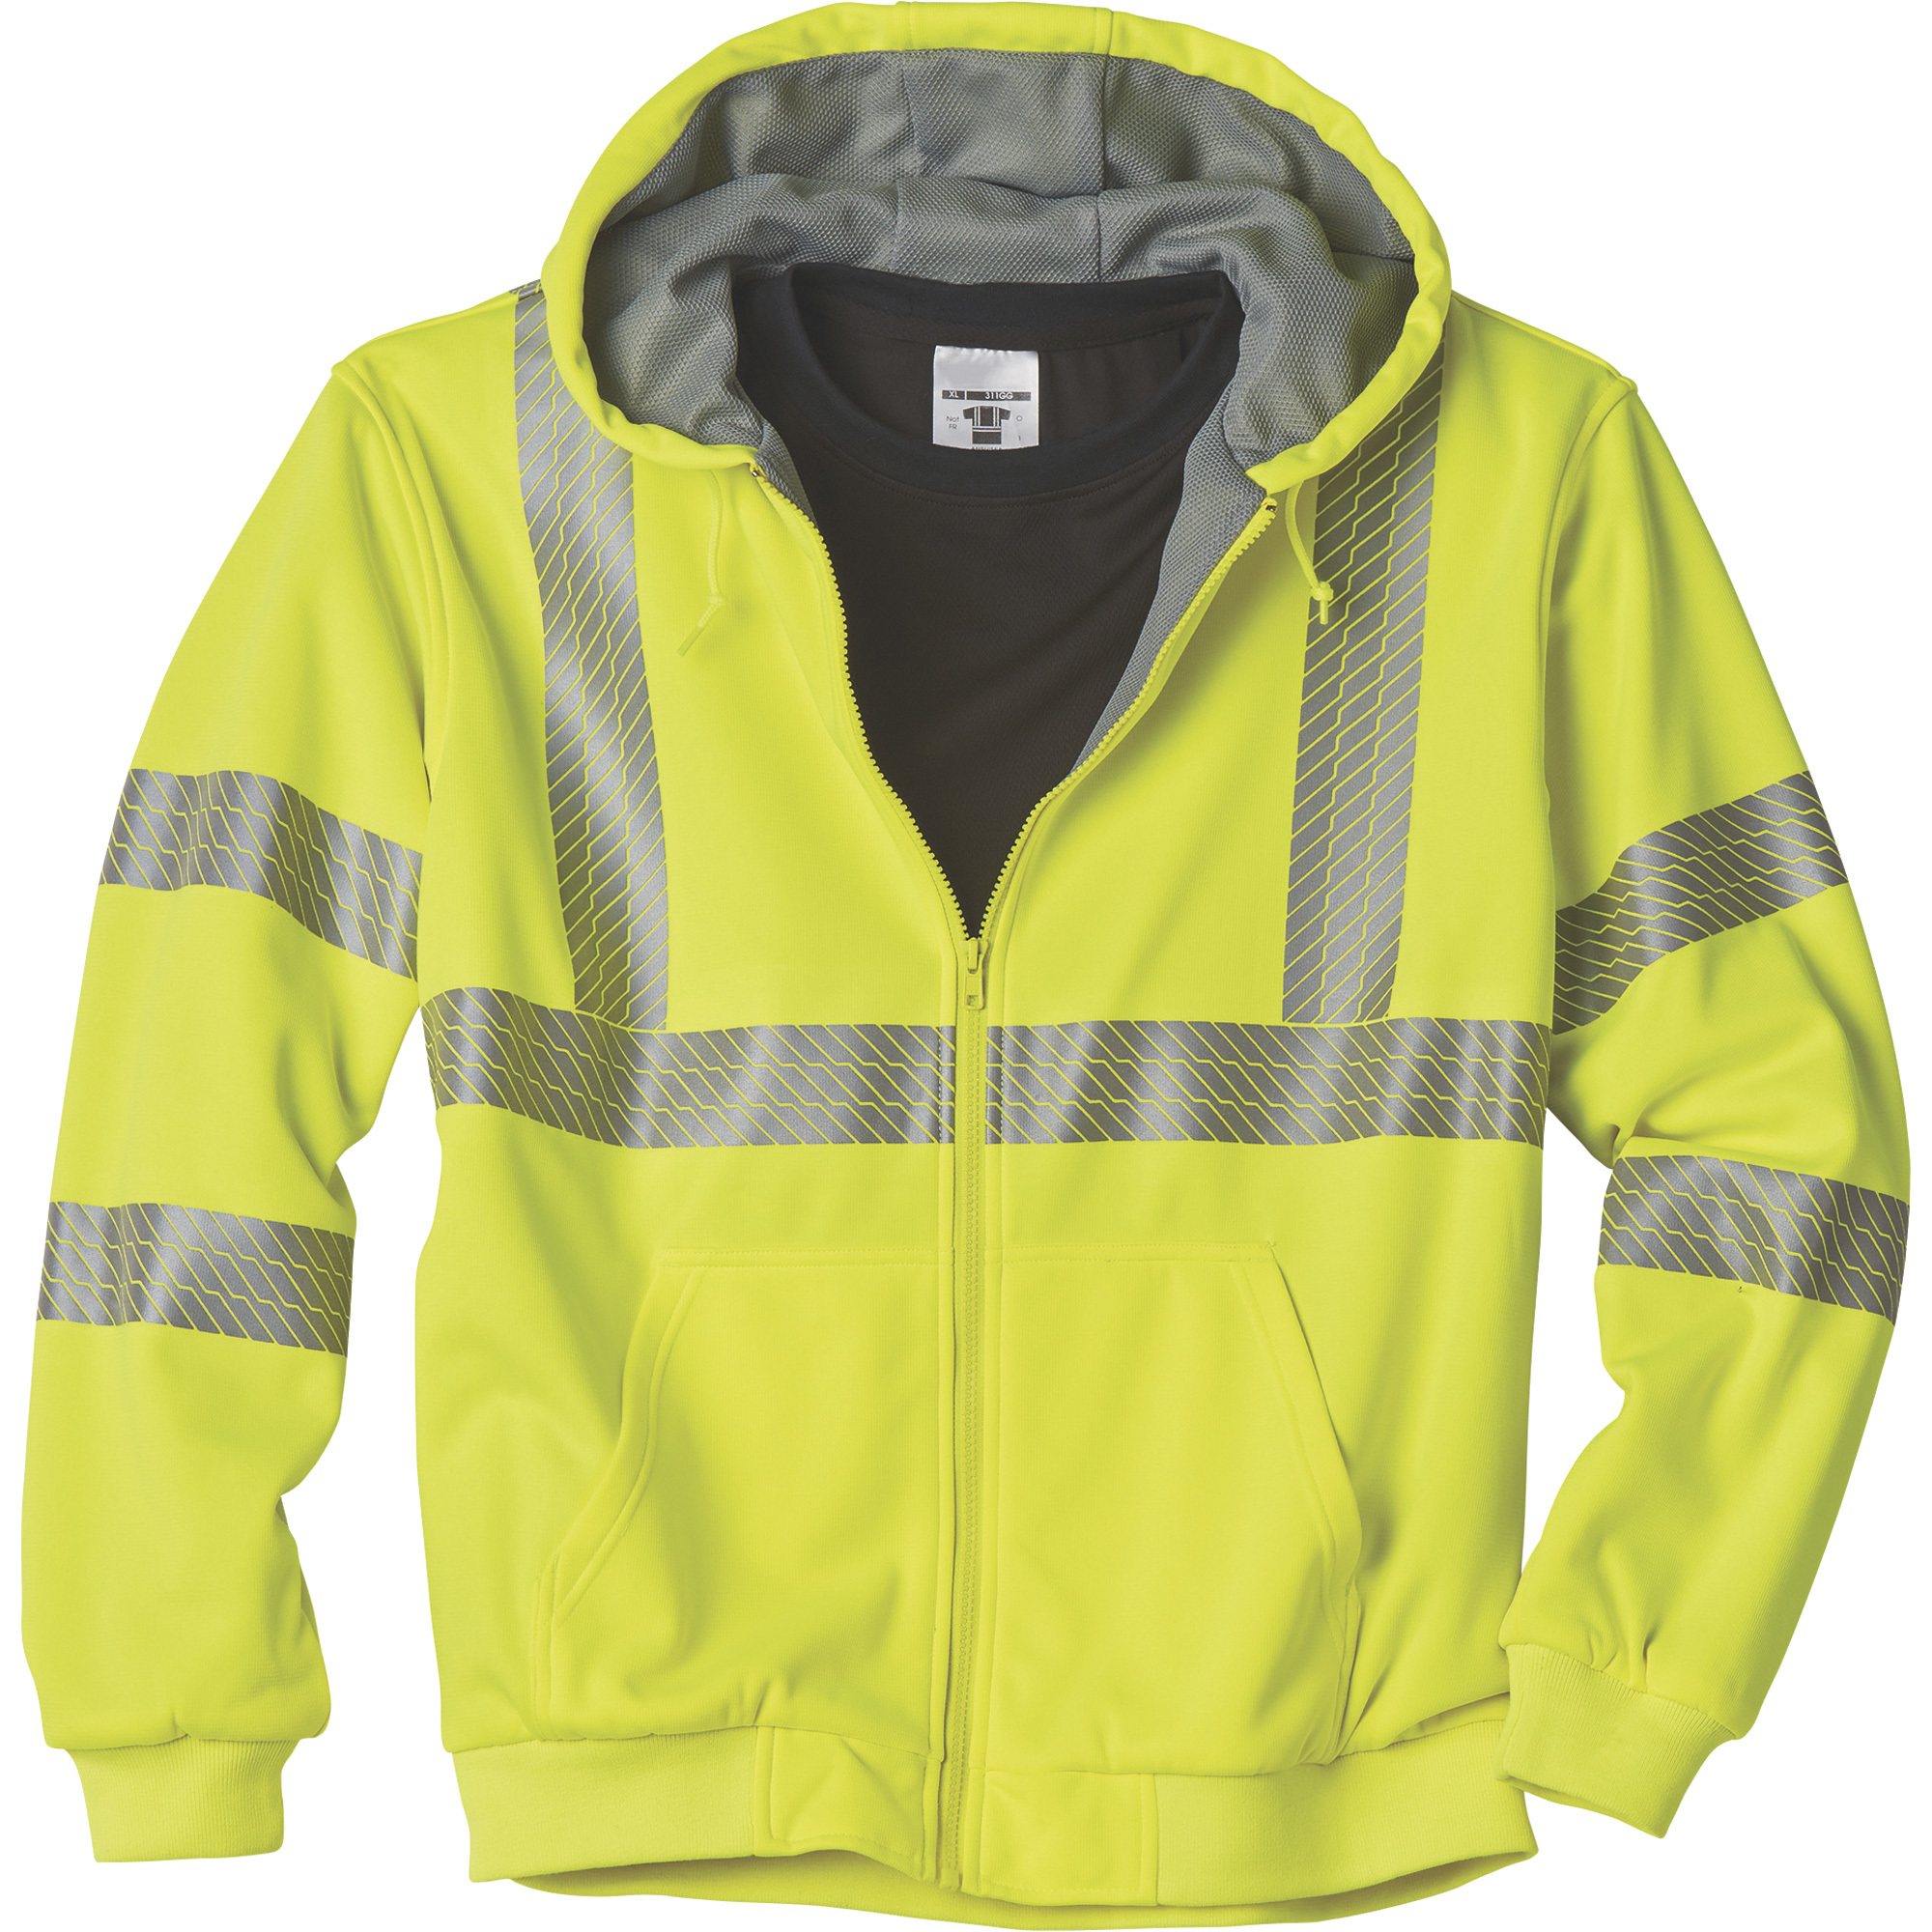 Work King Safety Men's Class 3 High Visibility Thermal-Lined Hoodie â Lime, 2XL